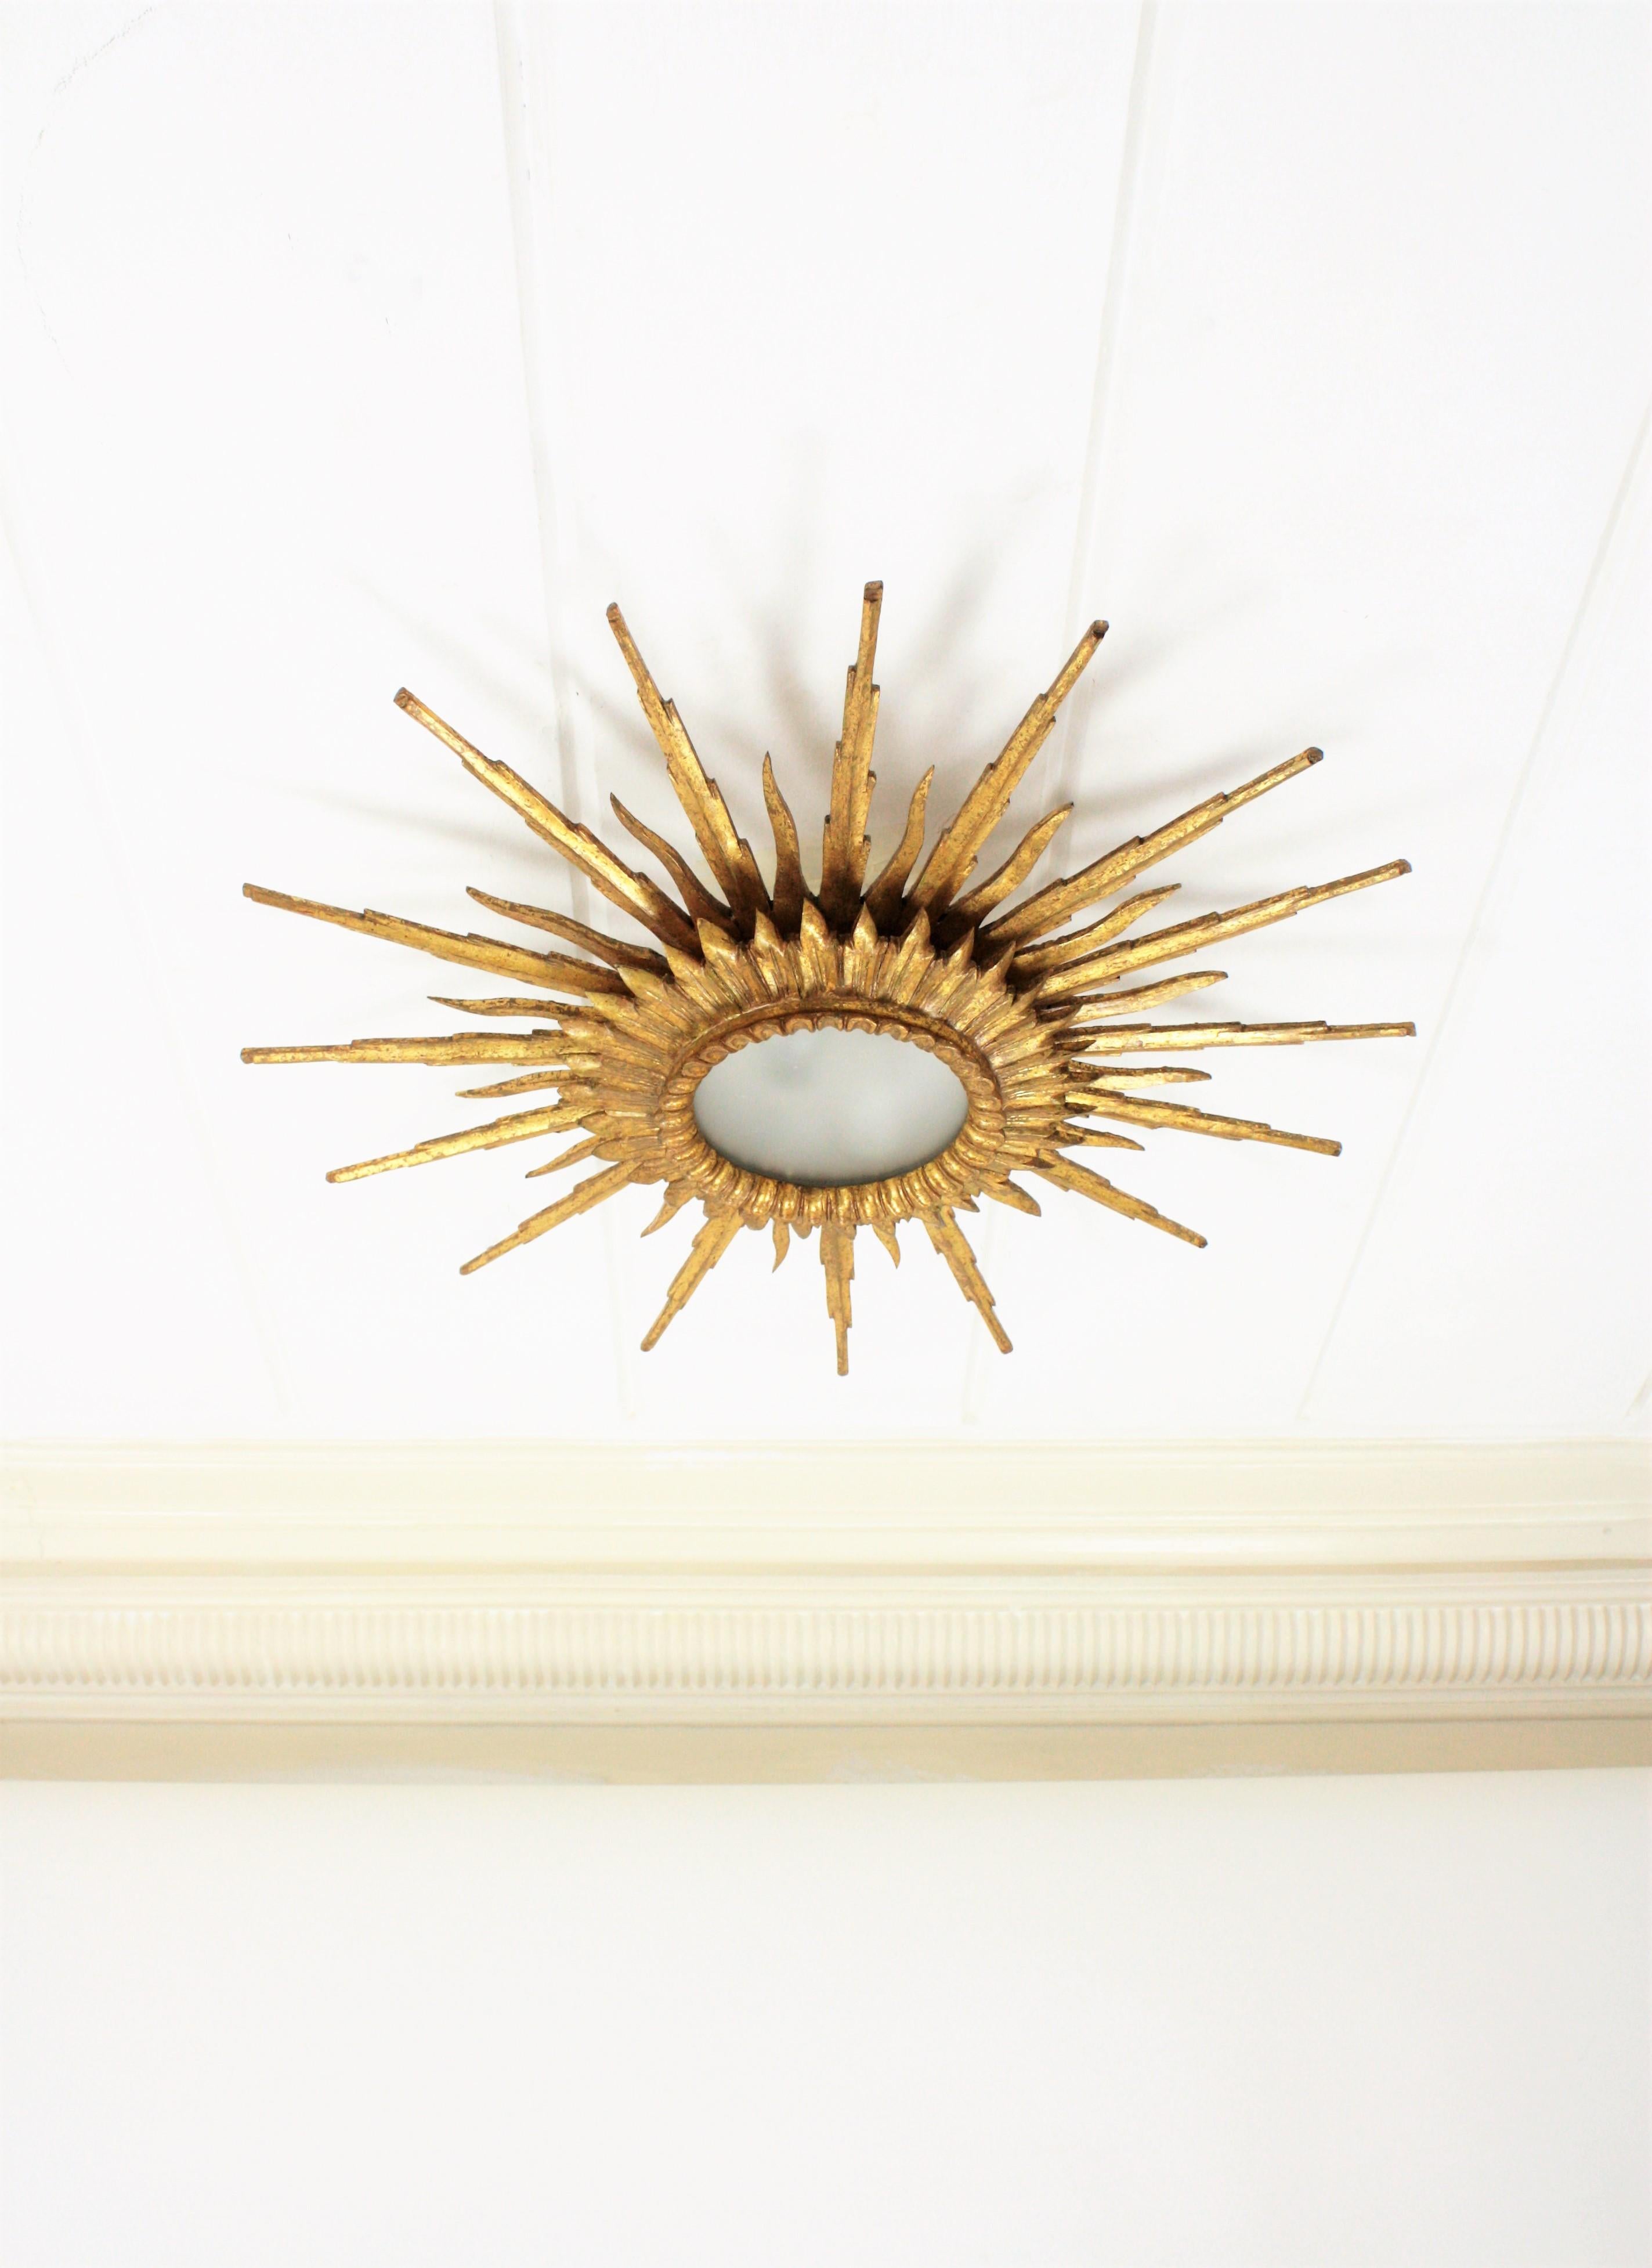 An spectacular gold leaf gilt sunburst flush mount or ceiling light fixture in Baroque style made in Spain at the mid-20th century. Large size with two layers of beams in different sizes that make this piece gorgeous and highly decorative even more